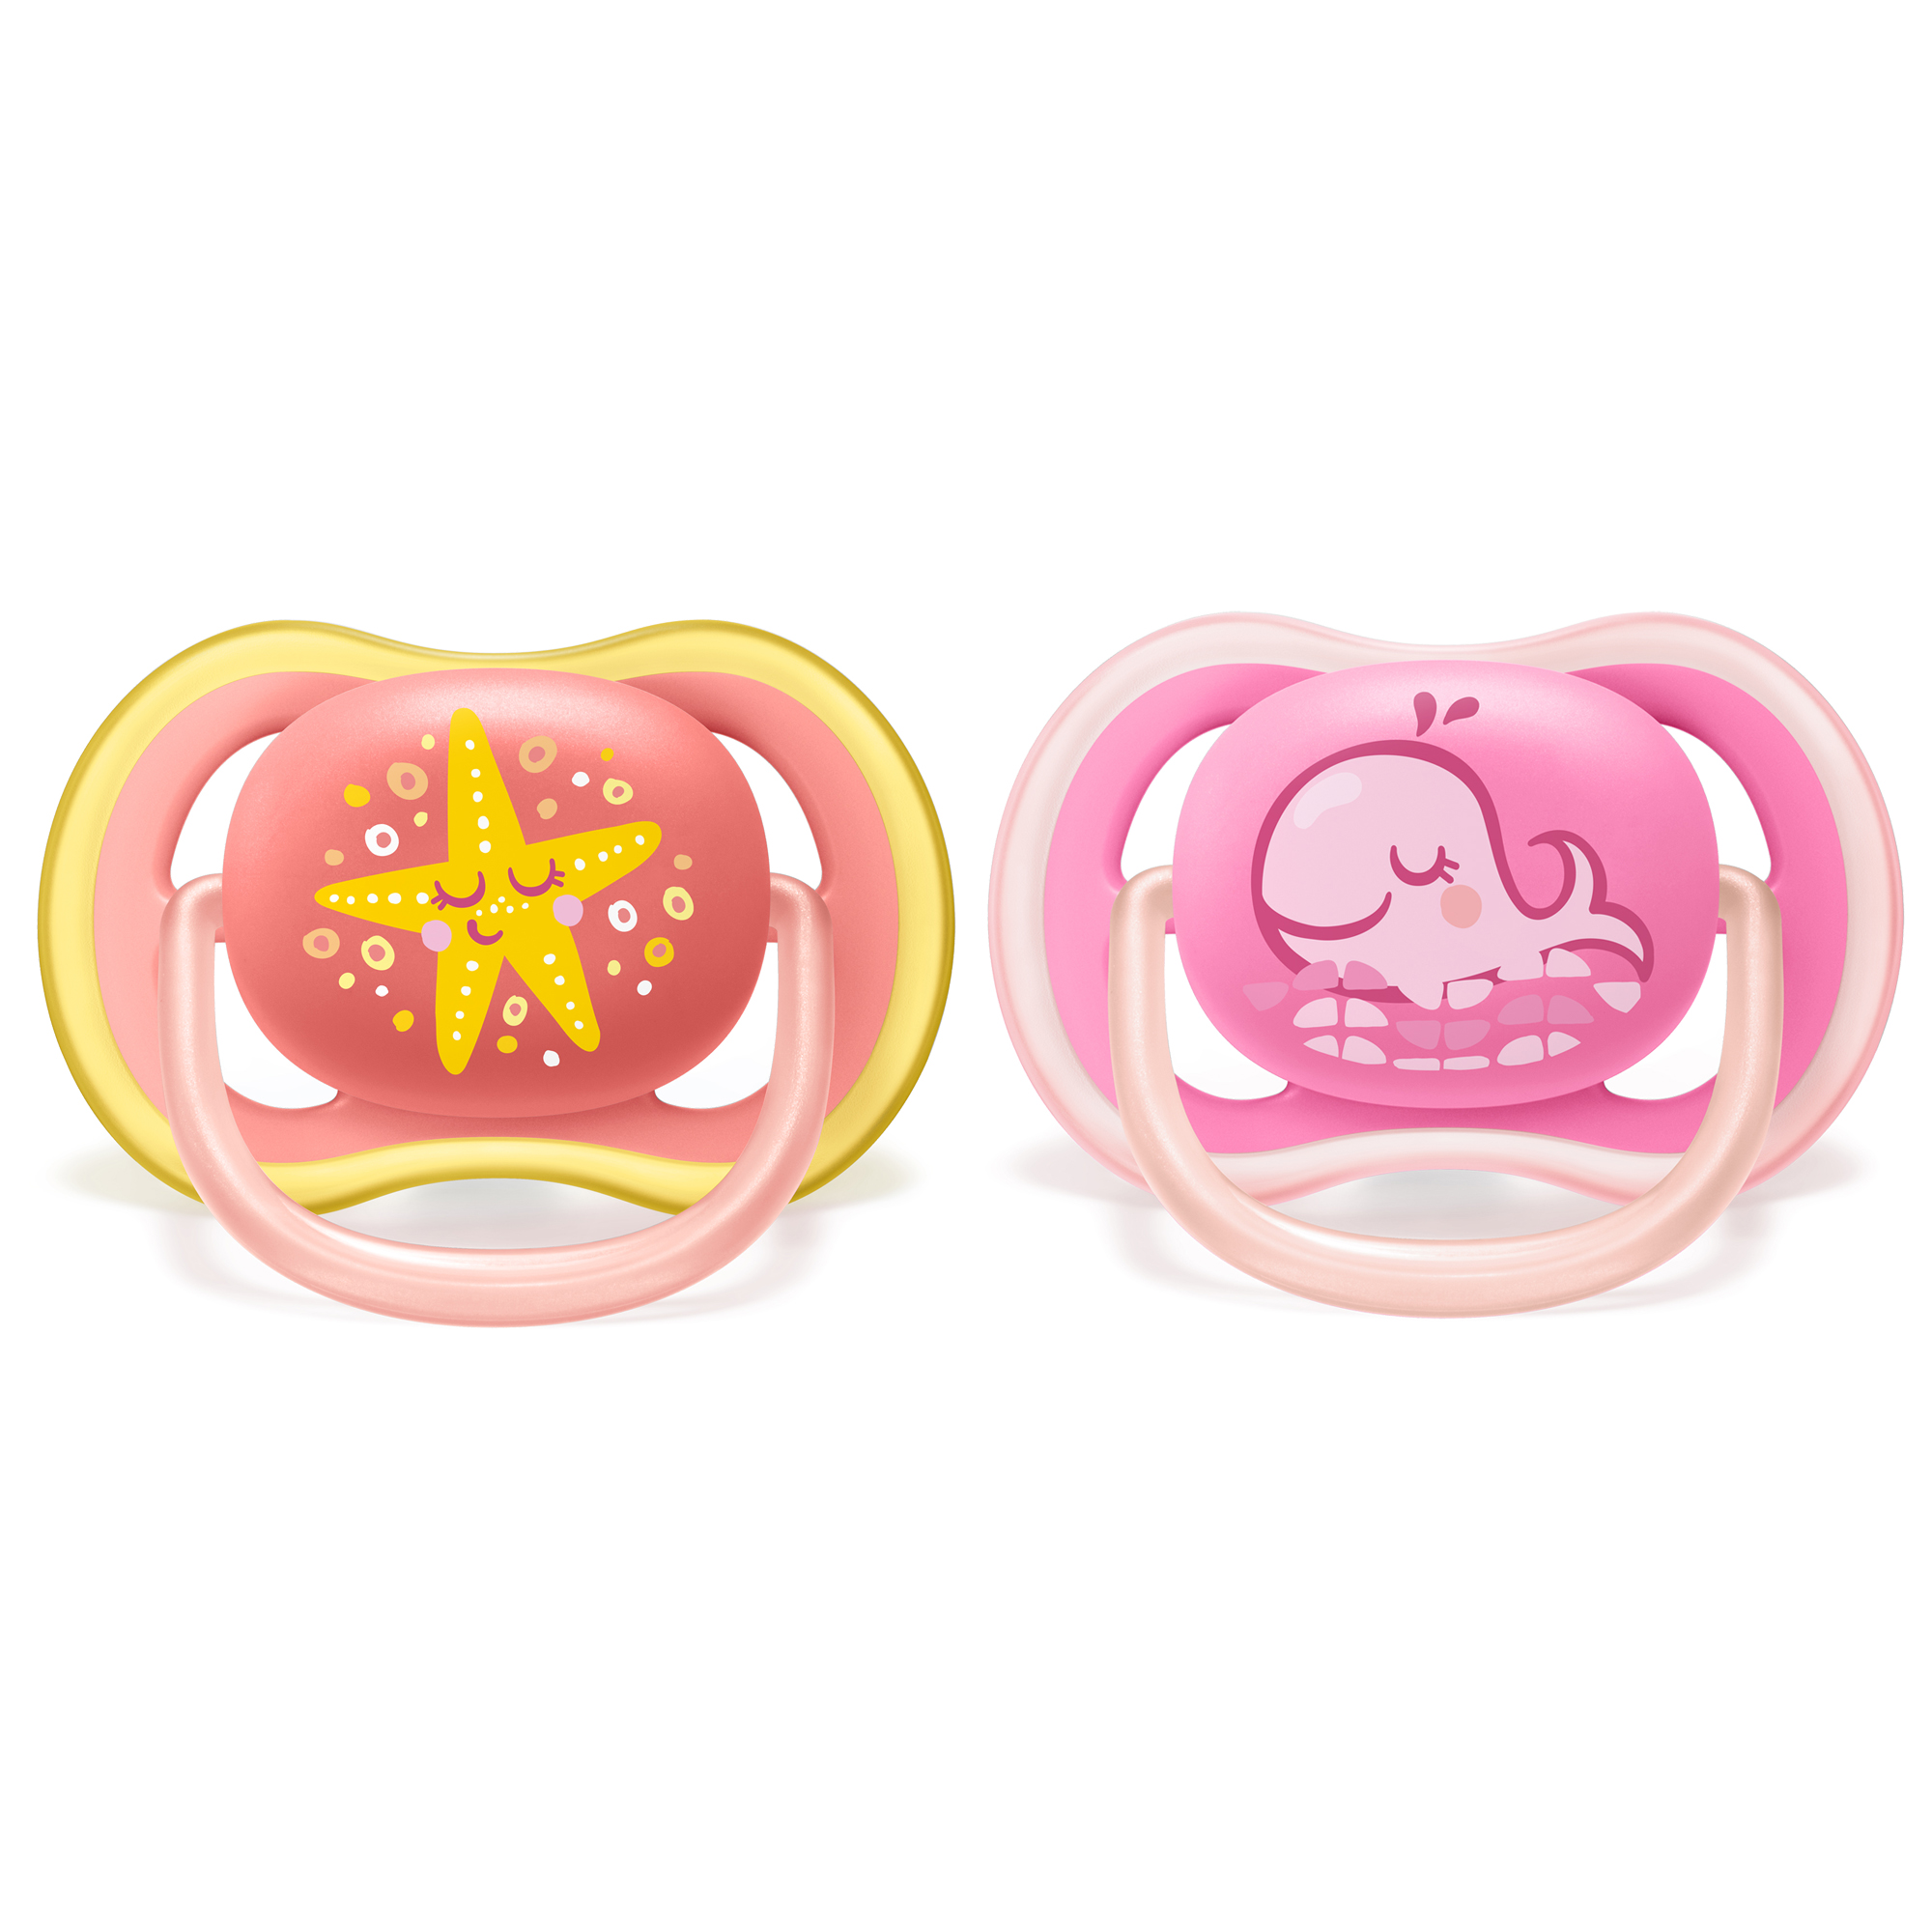 Lot de 2 sucettes Ultra Air 6/18 mois let's play ou love - Made in